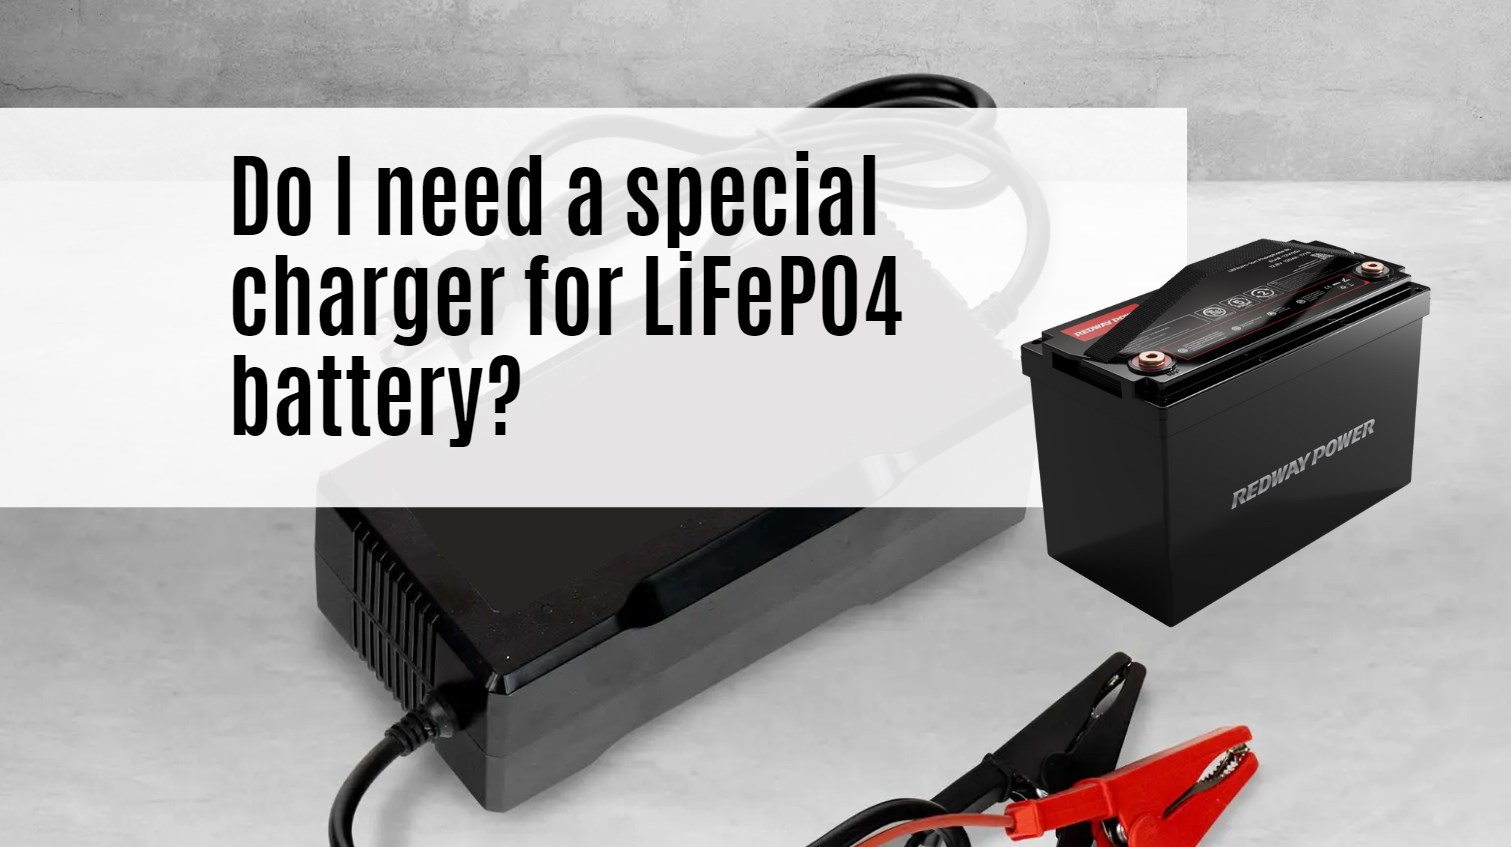 Do I need a special charger for LiFePO4 battery?